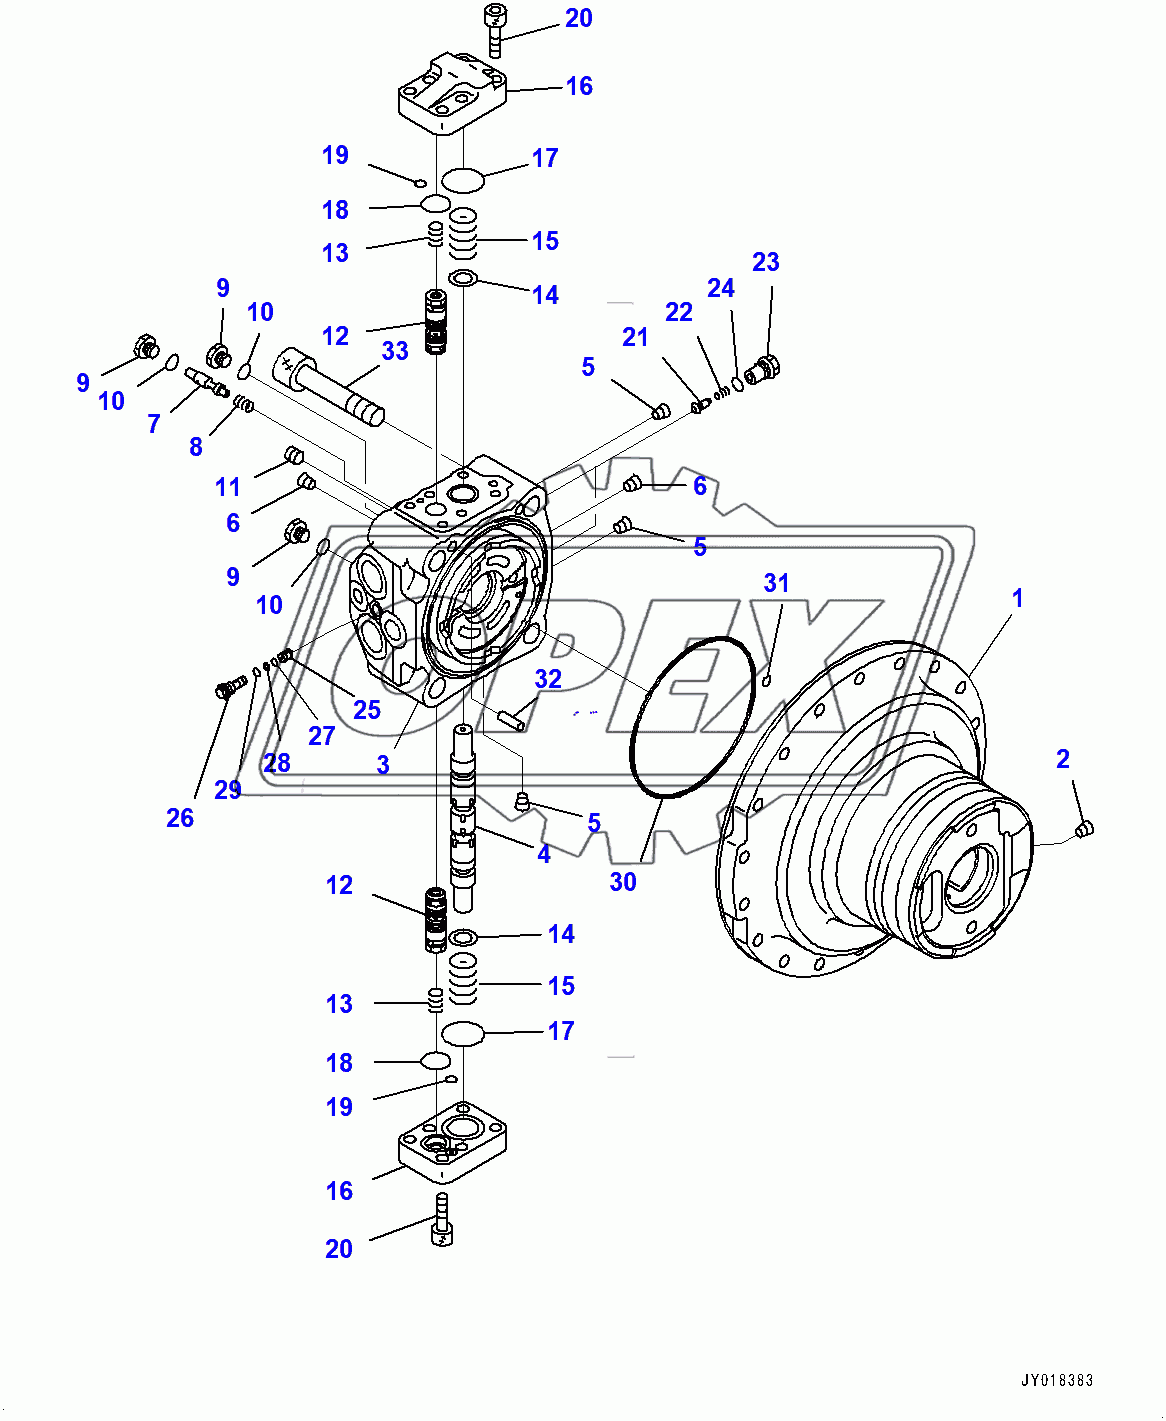  Travel Motor and Final Drive, Travel Motor  (1/2) (400001-400081)